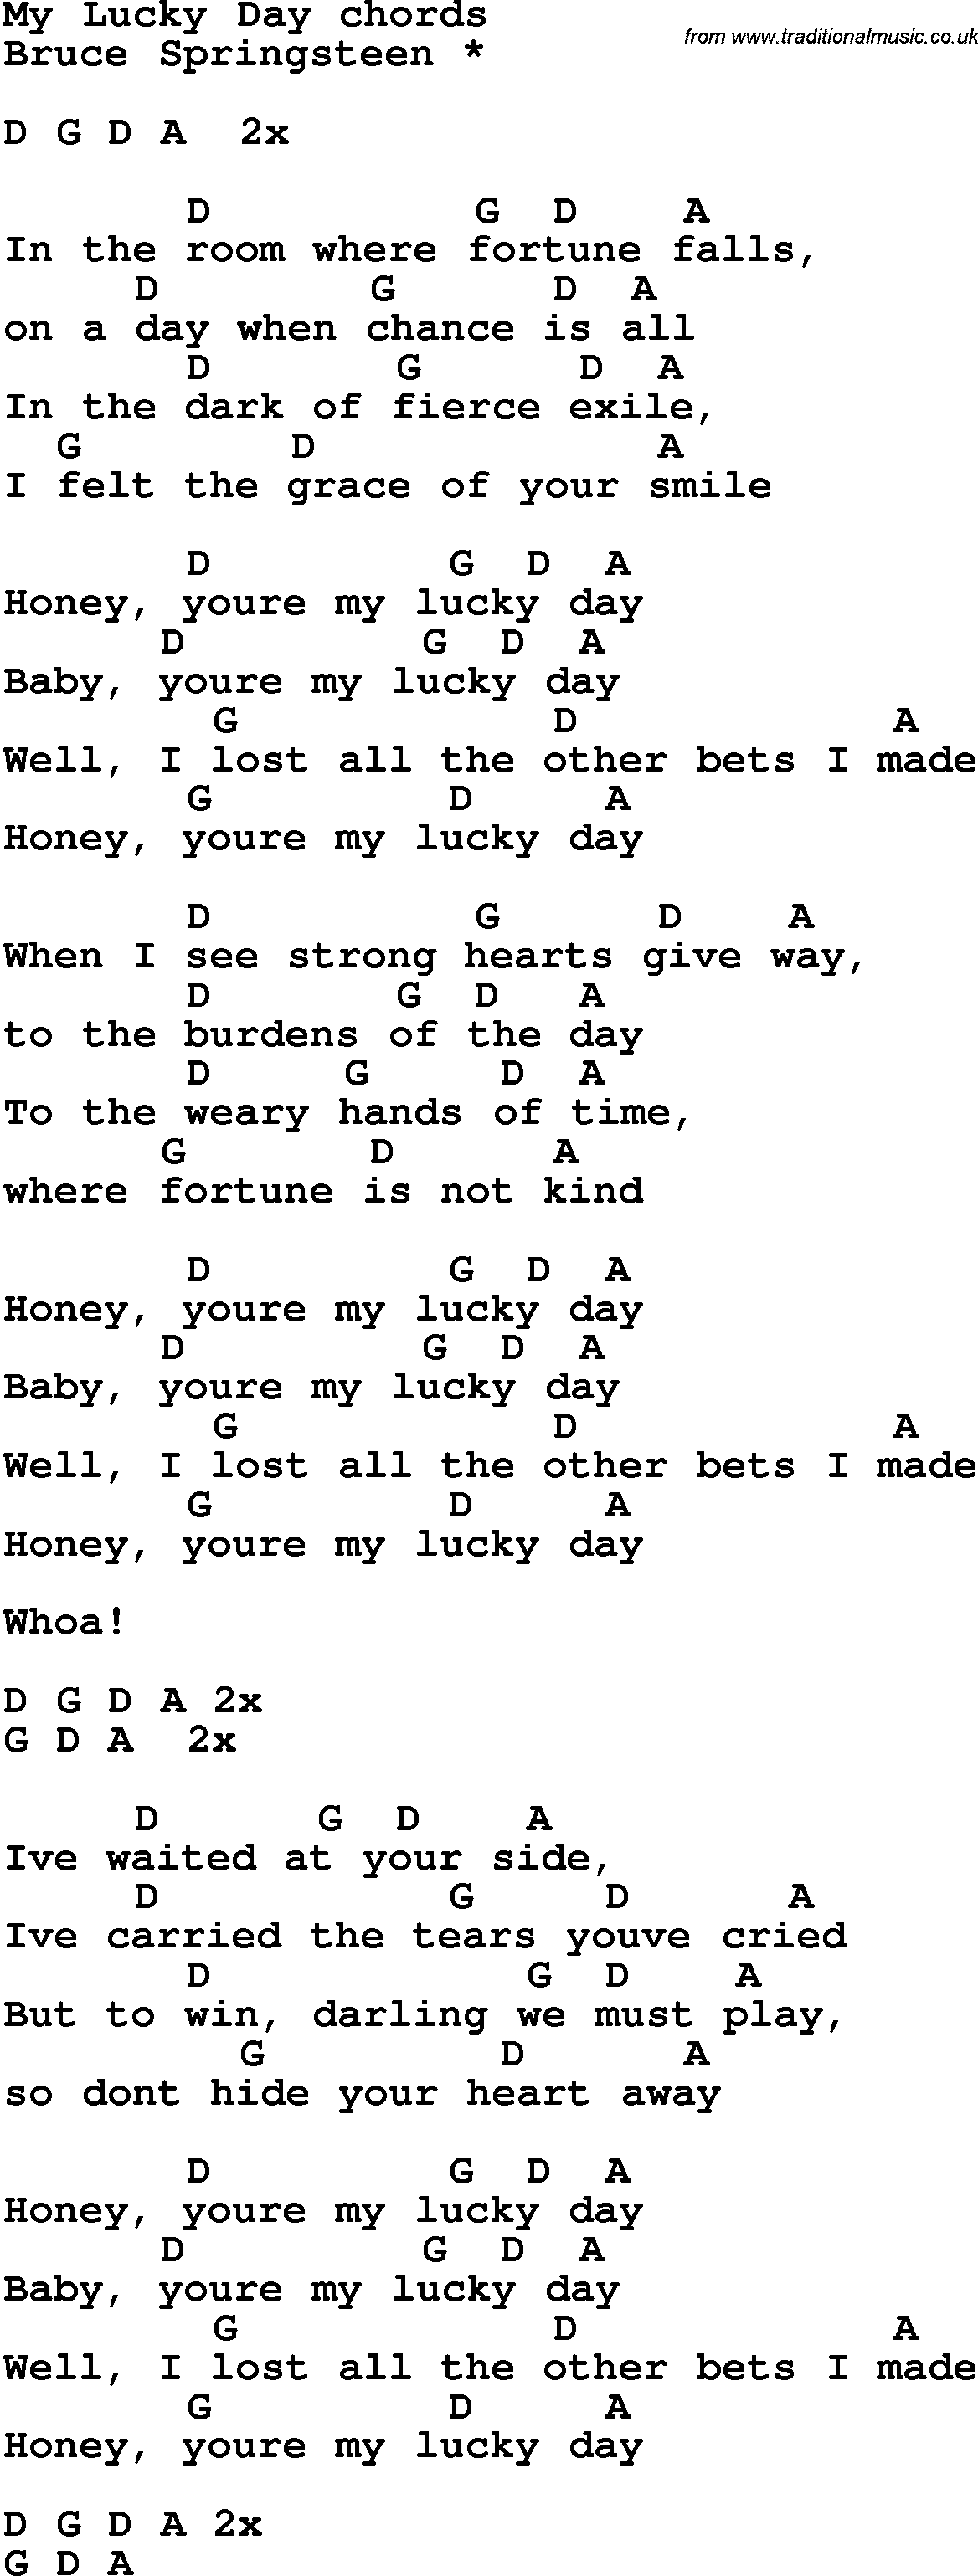 Song Lyrics with guitar chords for My Lucky Day